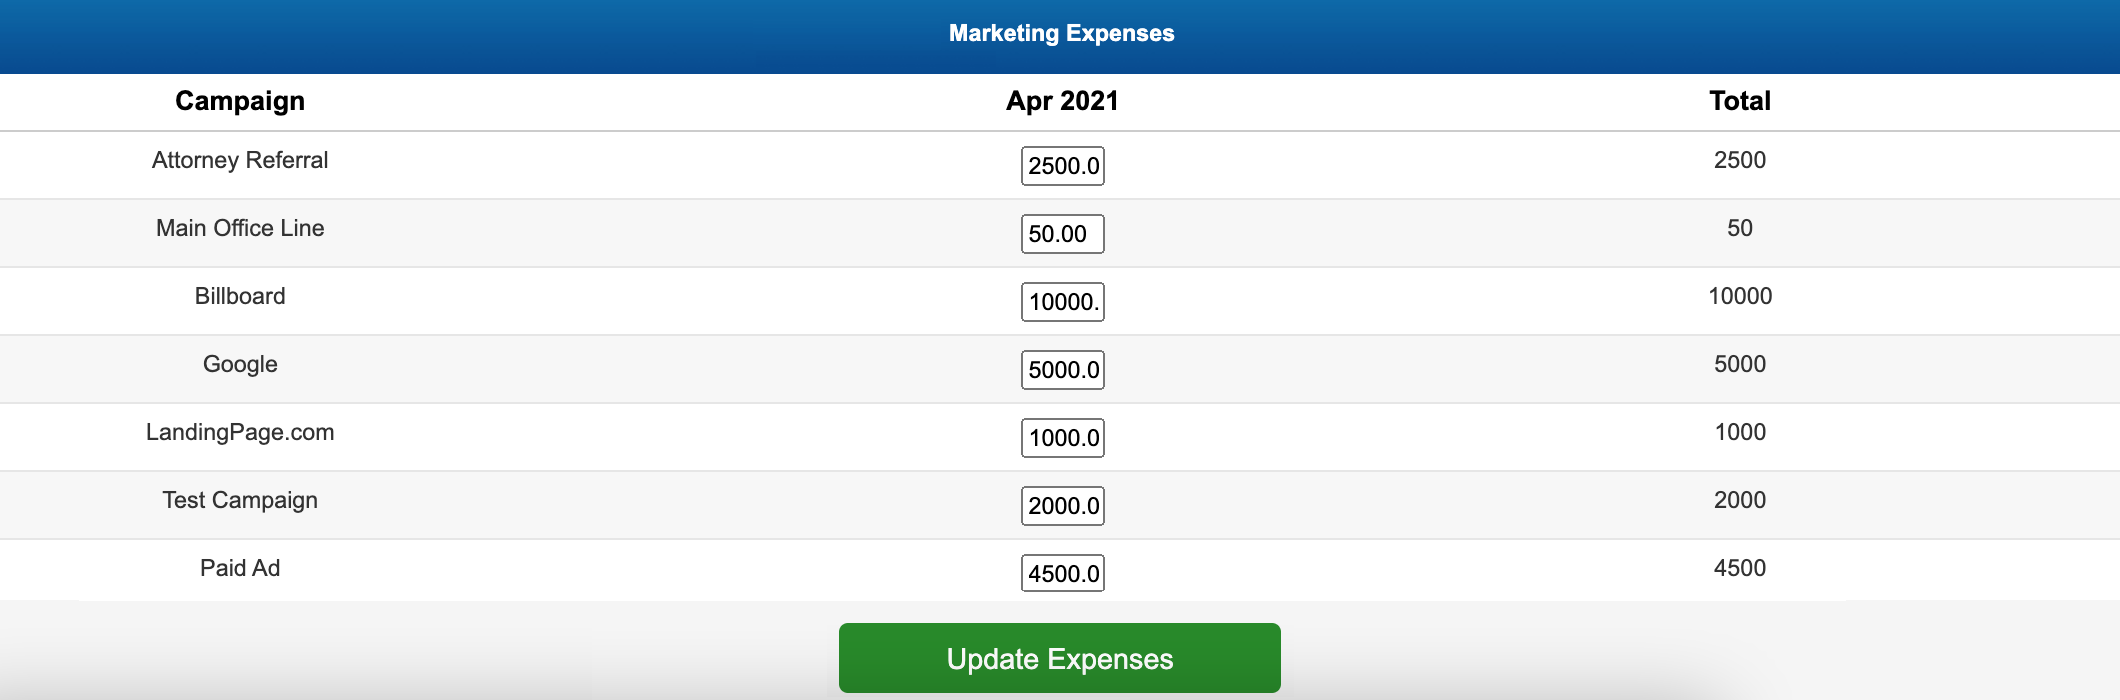 marketing_expenses_list.png